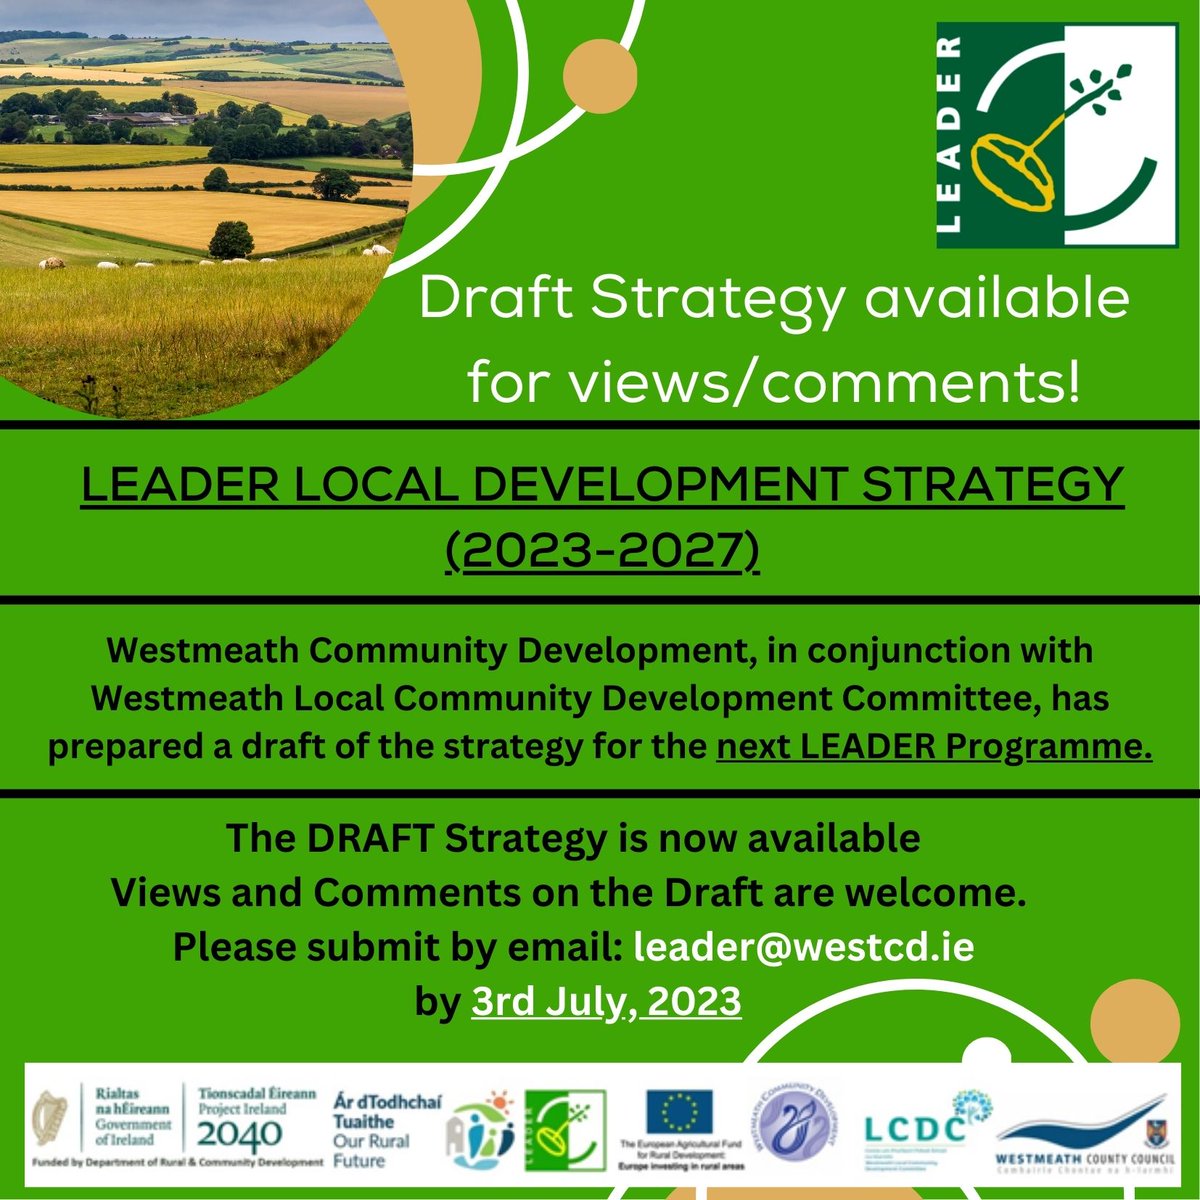 Draft #leader Local Development Strategy (2023-2027) available to review here bit.ly/46sO9kH
Views & comments welcome

#yourvoice #yourcommunity #ourruralfuture